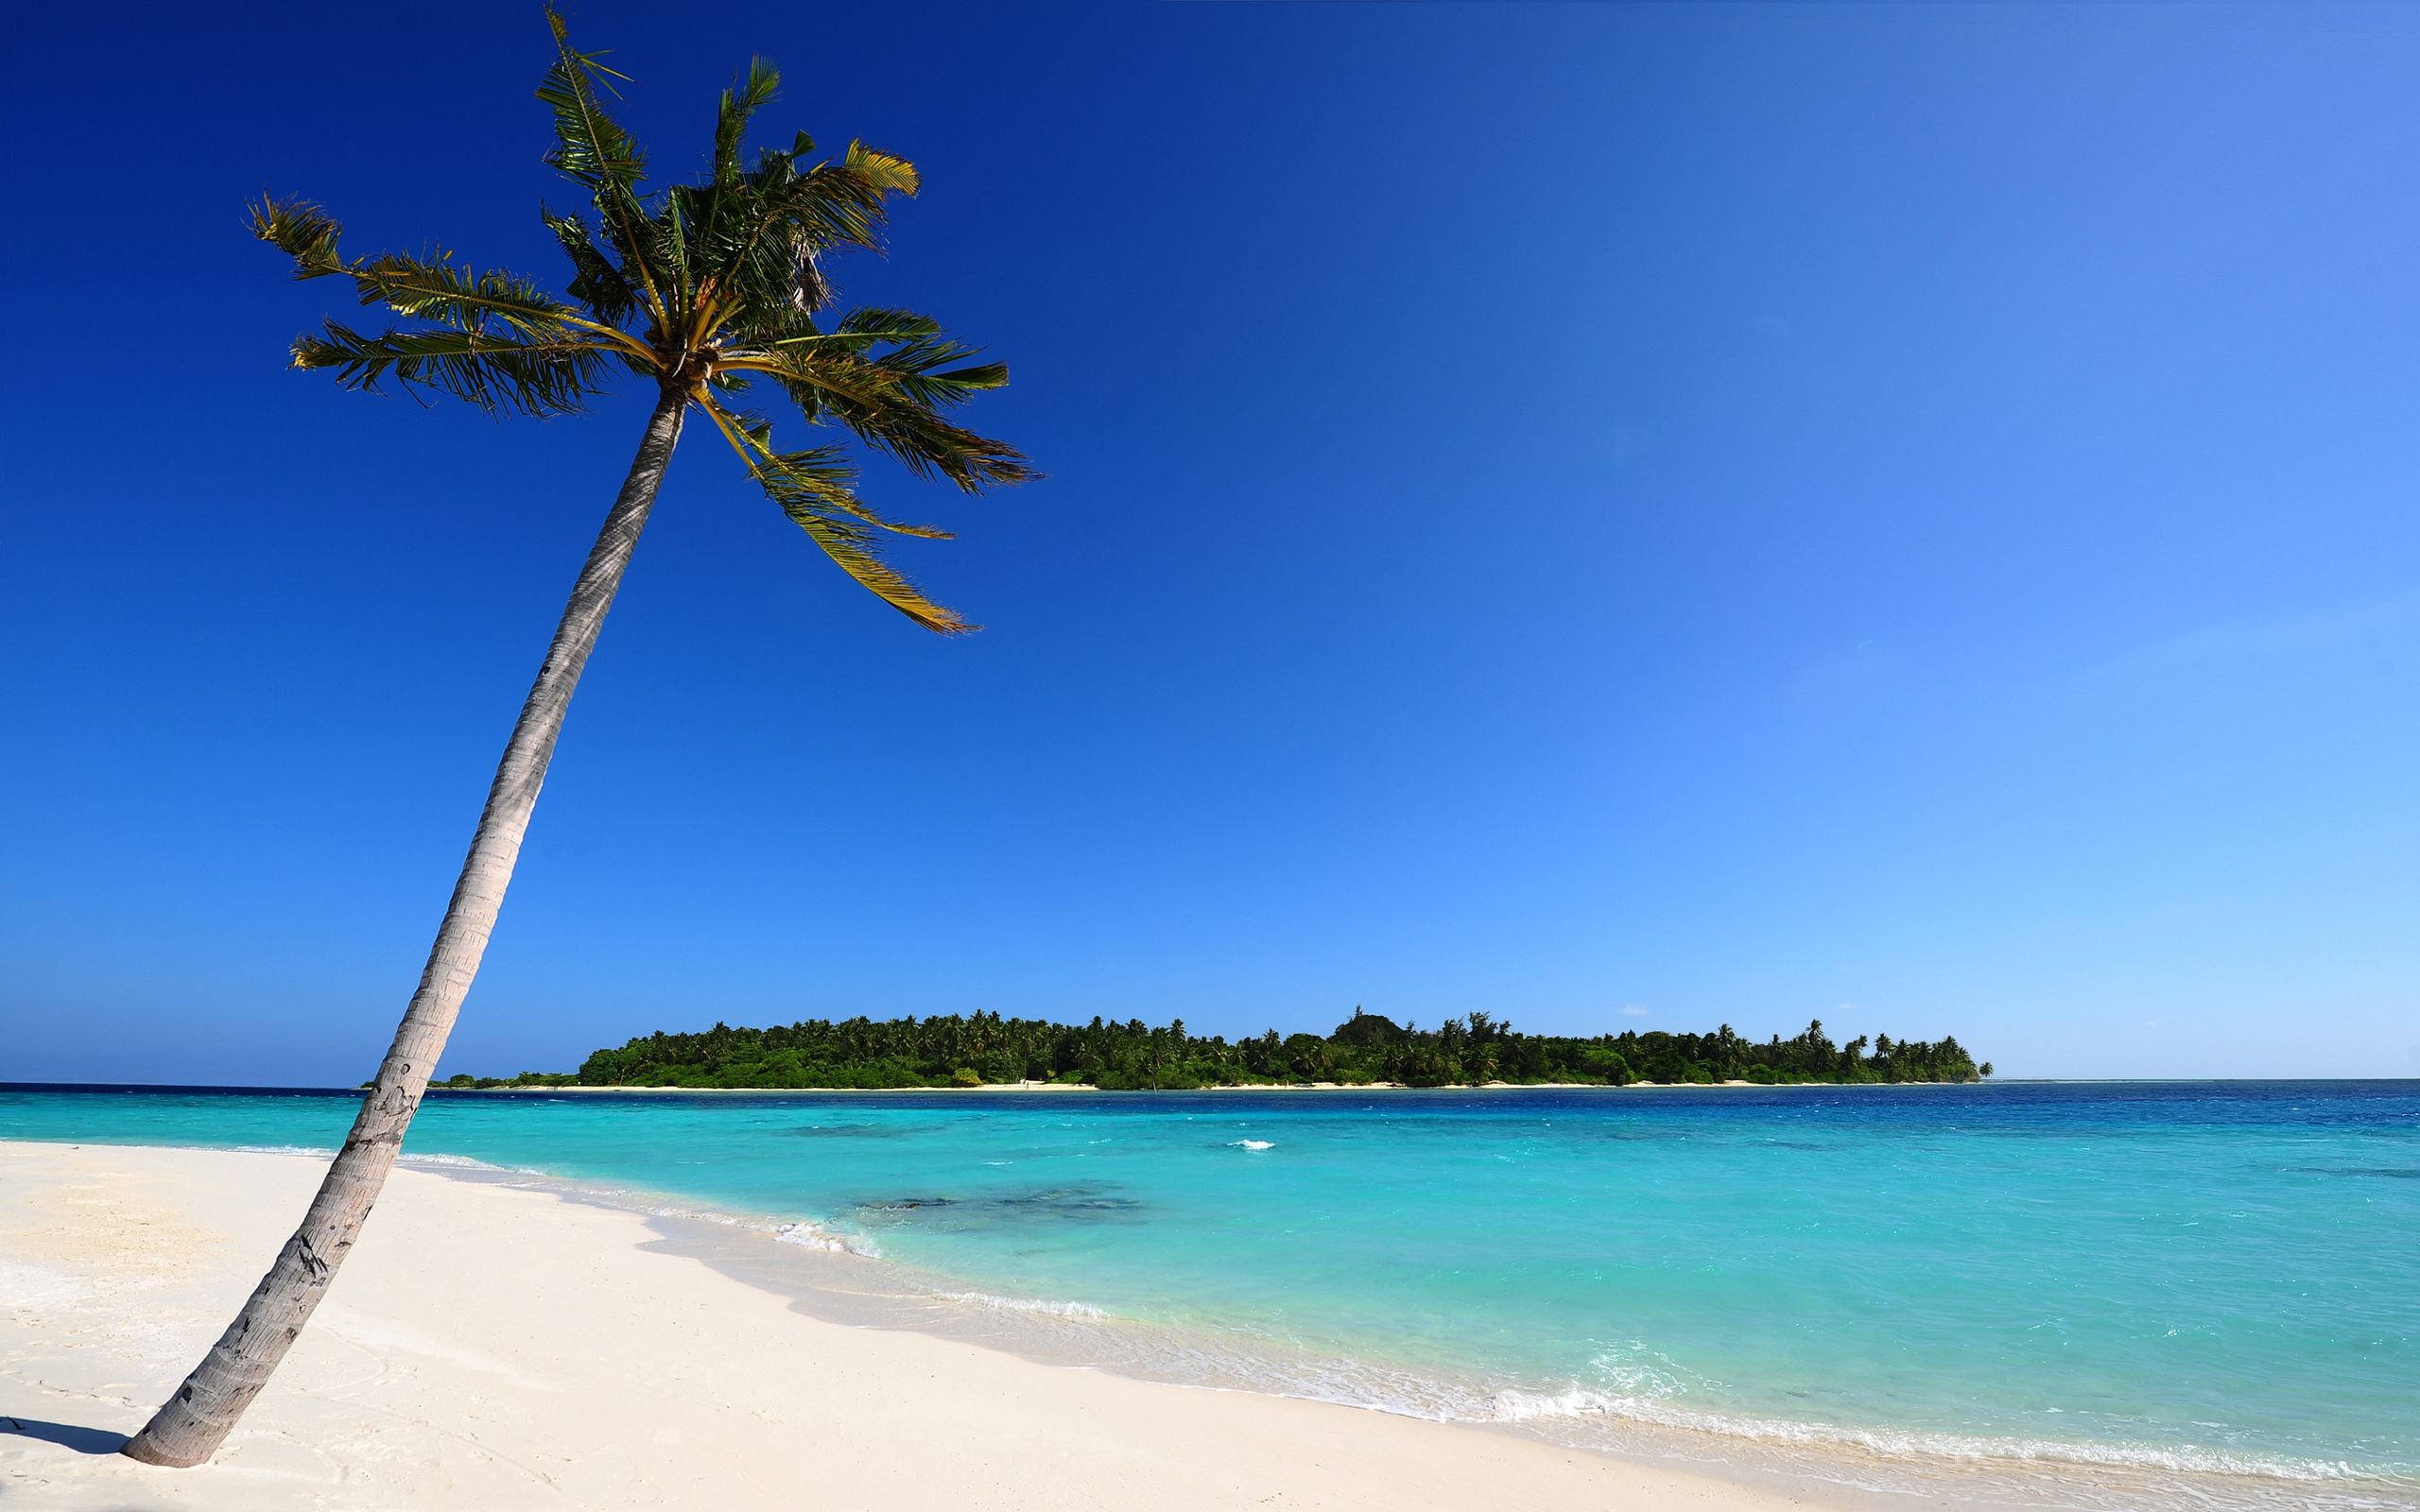 Background beach images free